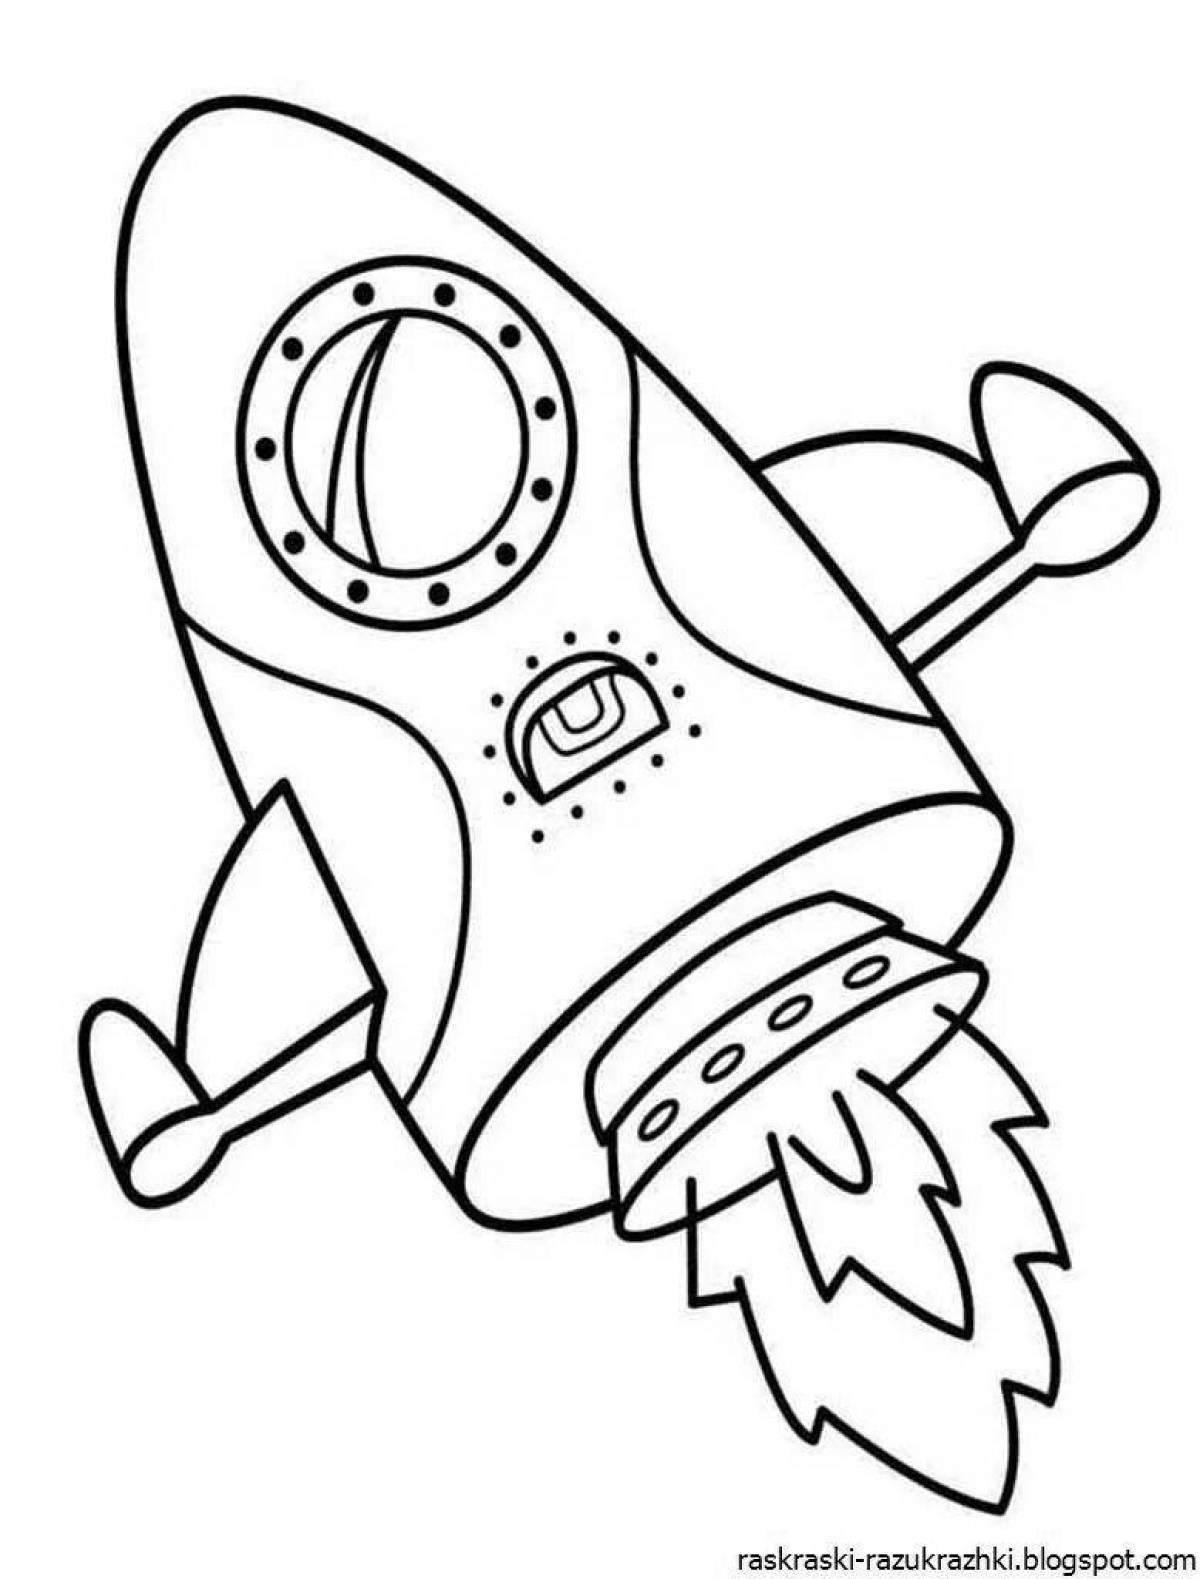 Cute rocket coloring pages for kids